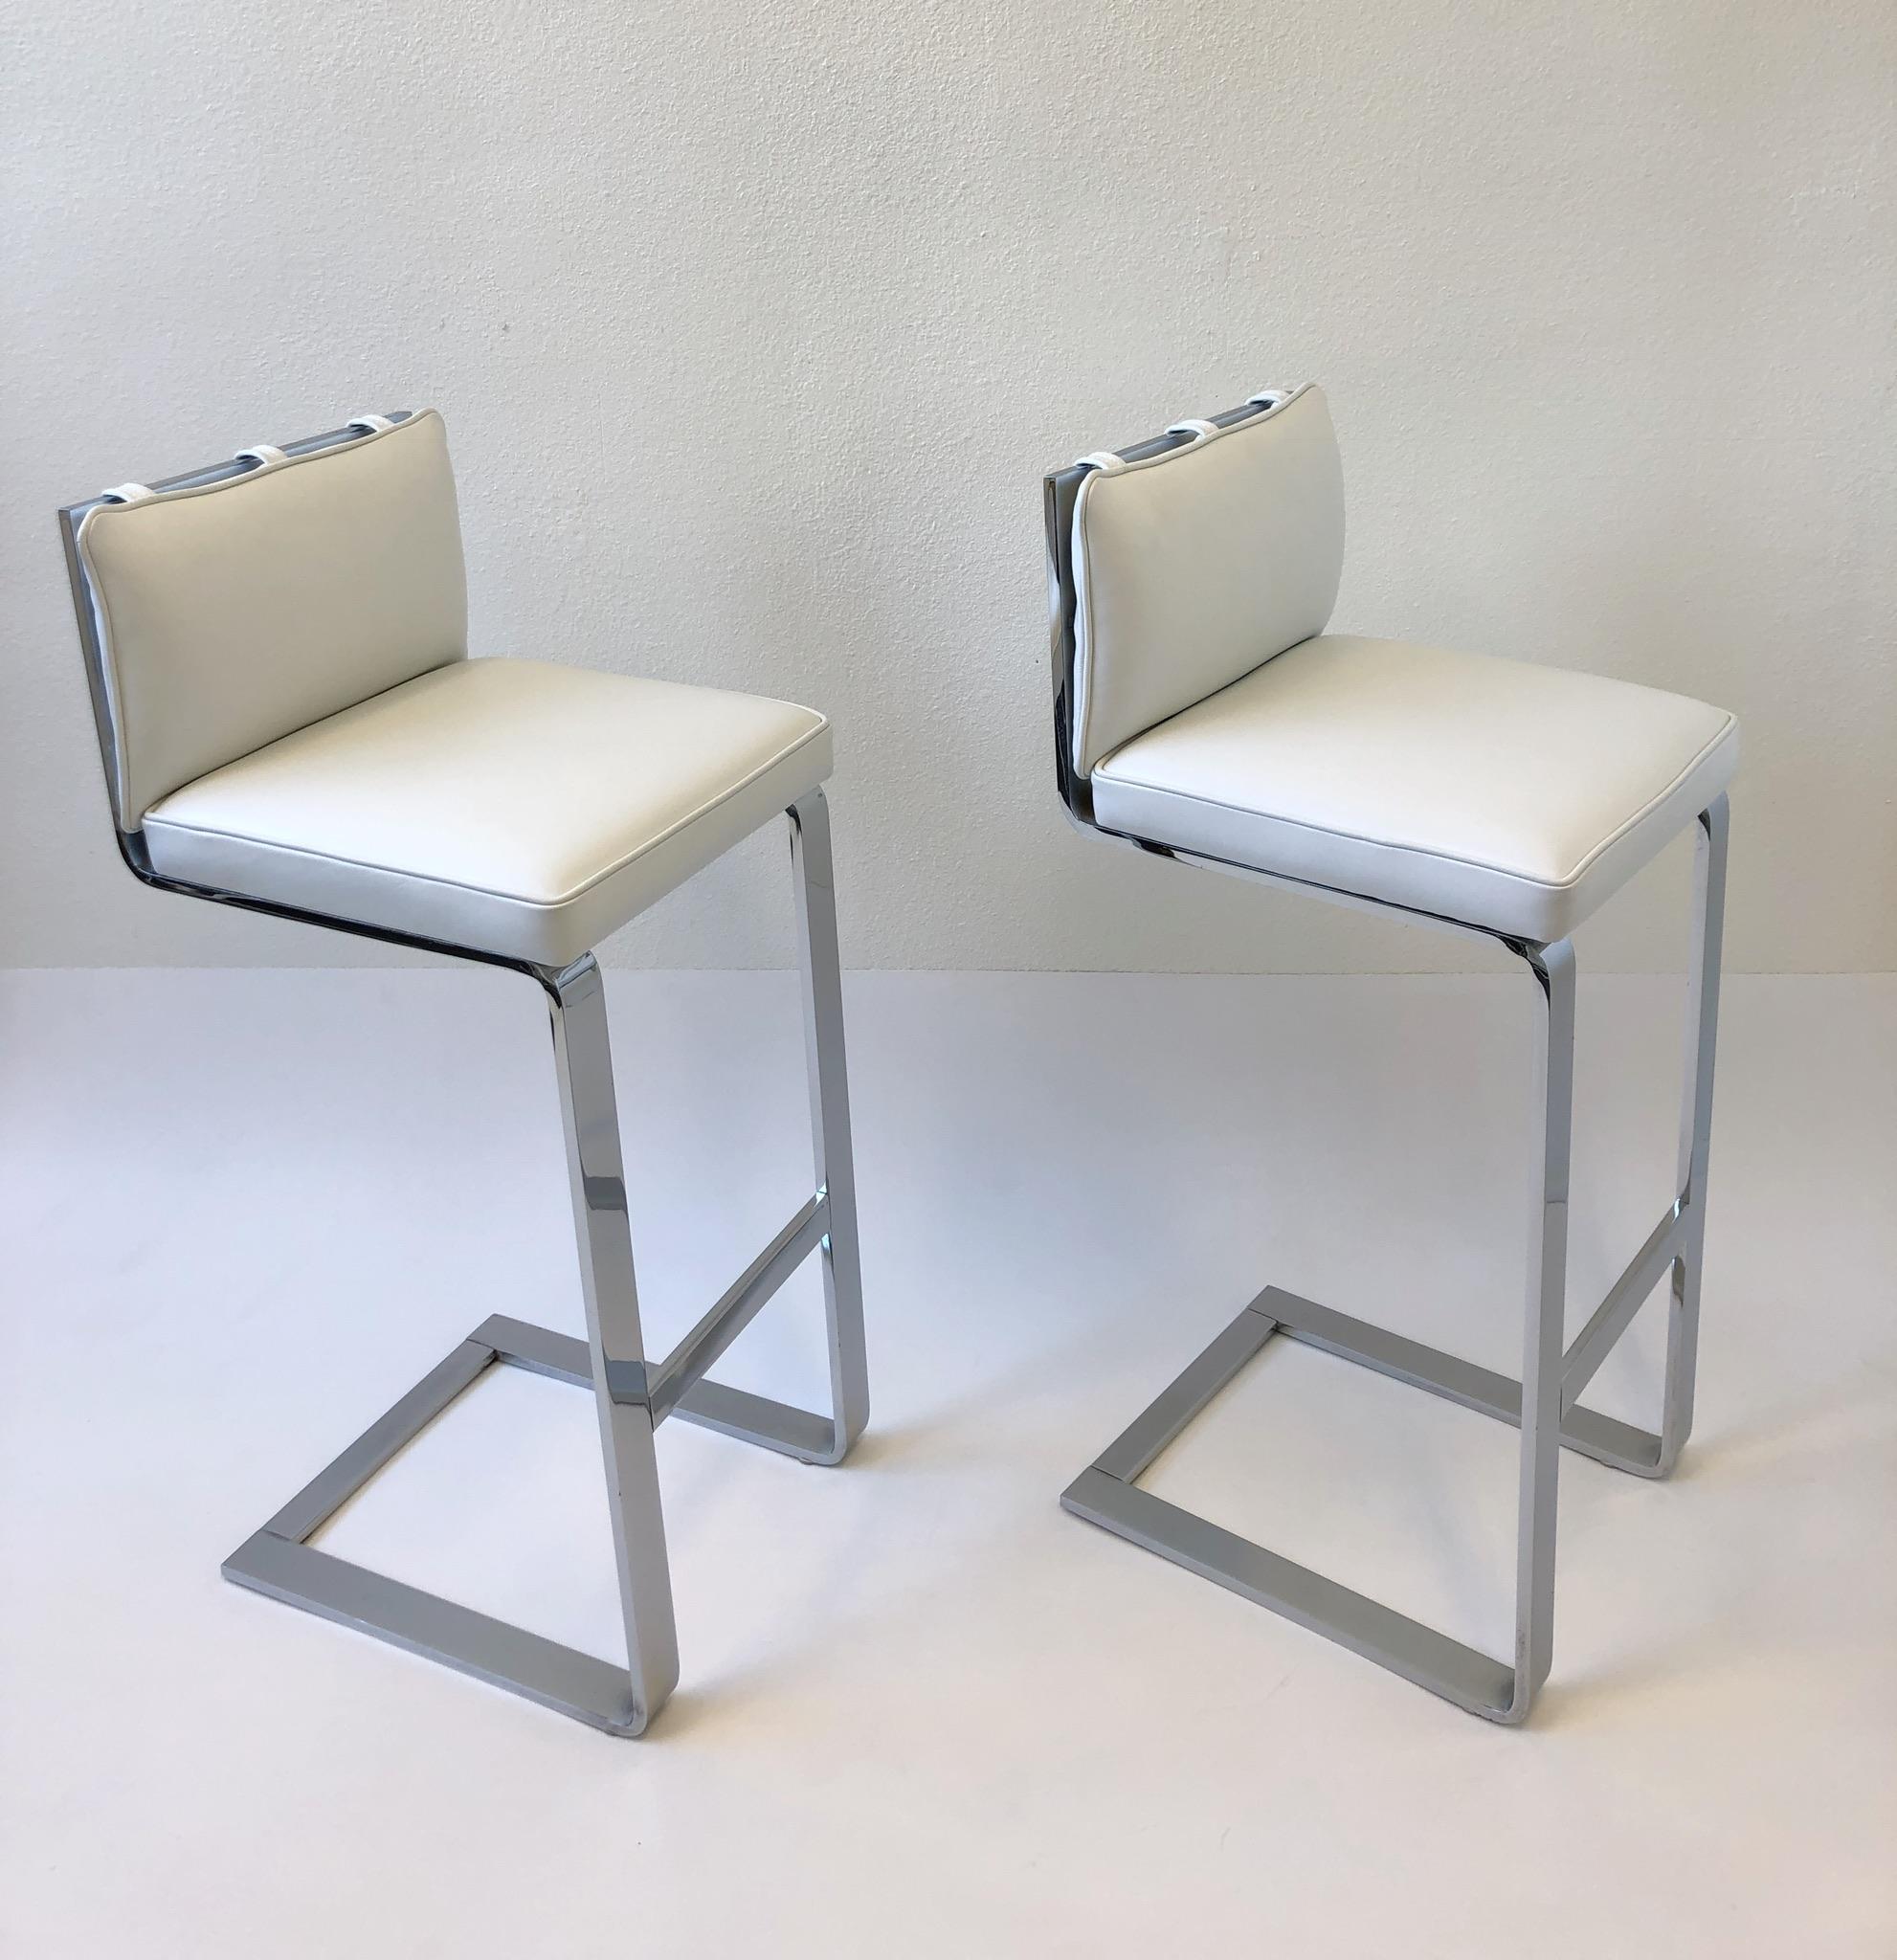 A beautiful polish chrome and white leather pair of barstool design in the 1970s by Milo Baughman. Newly reupholstered in a soft white leather. The frames are in original condition, So they show some age (See detail photos).
Dimensions: 39” high,